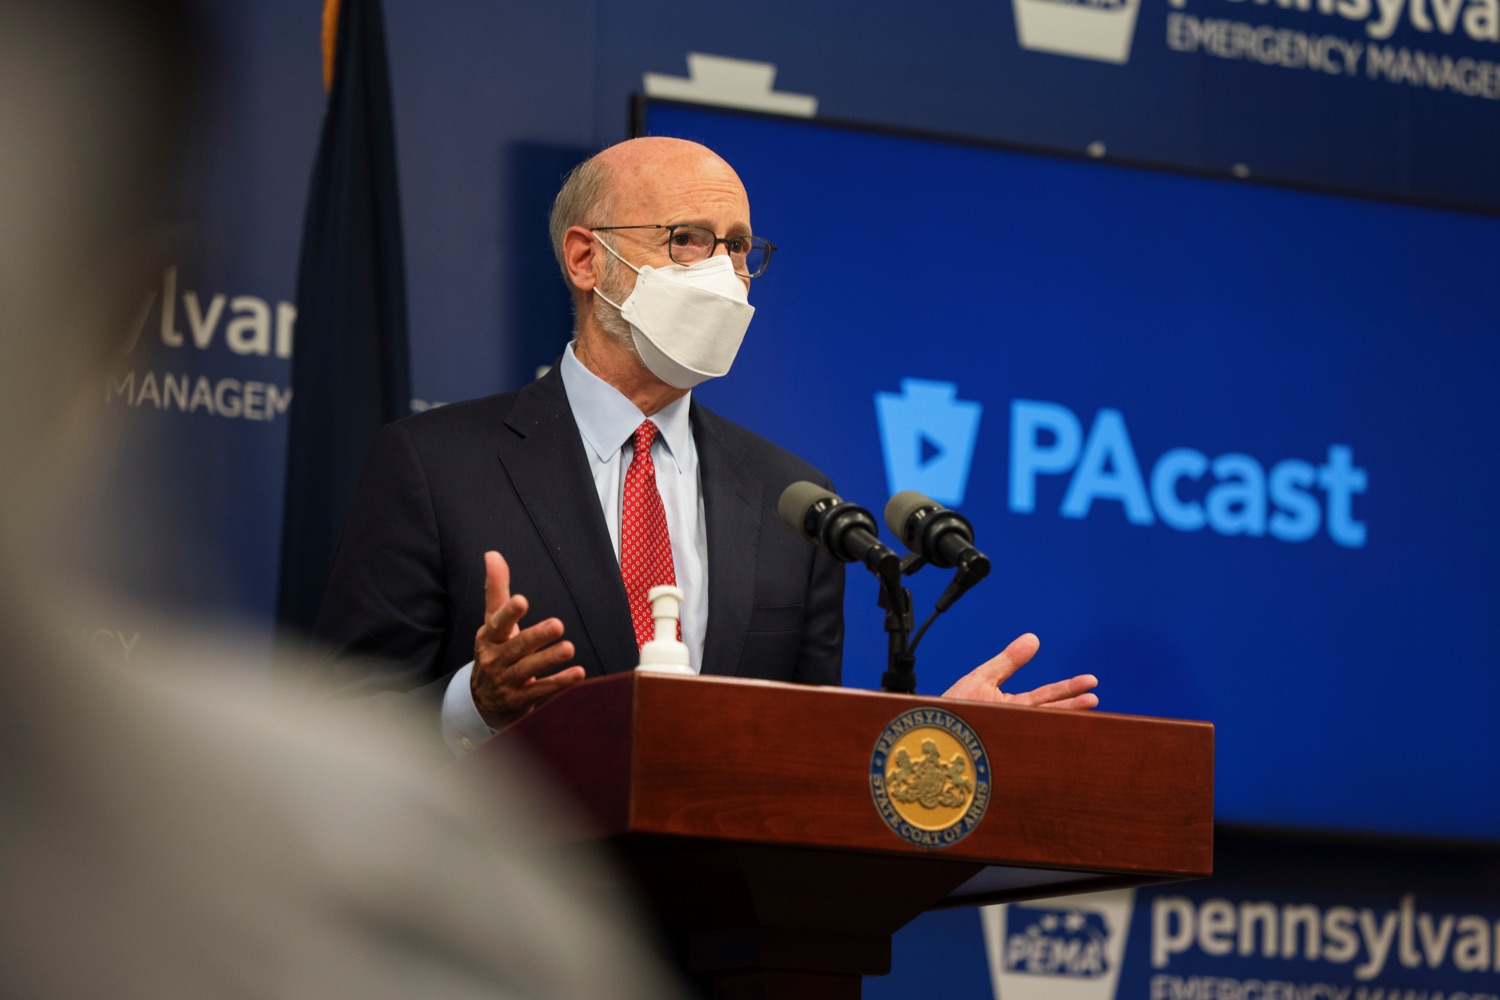 Governor Tom Wolf speaks during a press conference, which discussed the current state of COVID-19 and a new Secretary of Health order requiring masks to be worn inside K-12 school buildings, early learning programs and child care providers, inside Pennsylvania Emergency Management Agency in Harrisburg on Tuesday, August 31, 2021.<br><a href="https://filesource.amperwave.net/commonwealthofpa/photo/19089_GOV_School_Masking_NK_003.jpg" target="_blank">⇣ Download Photo</a>